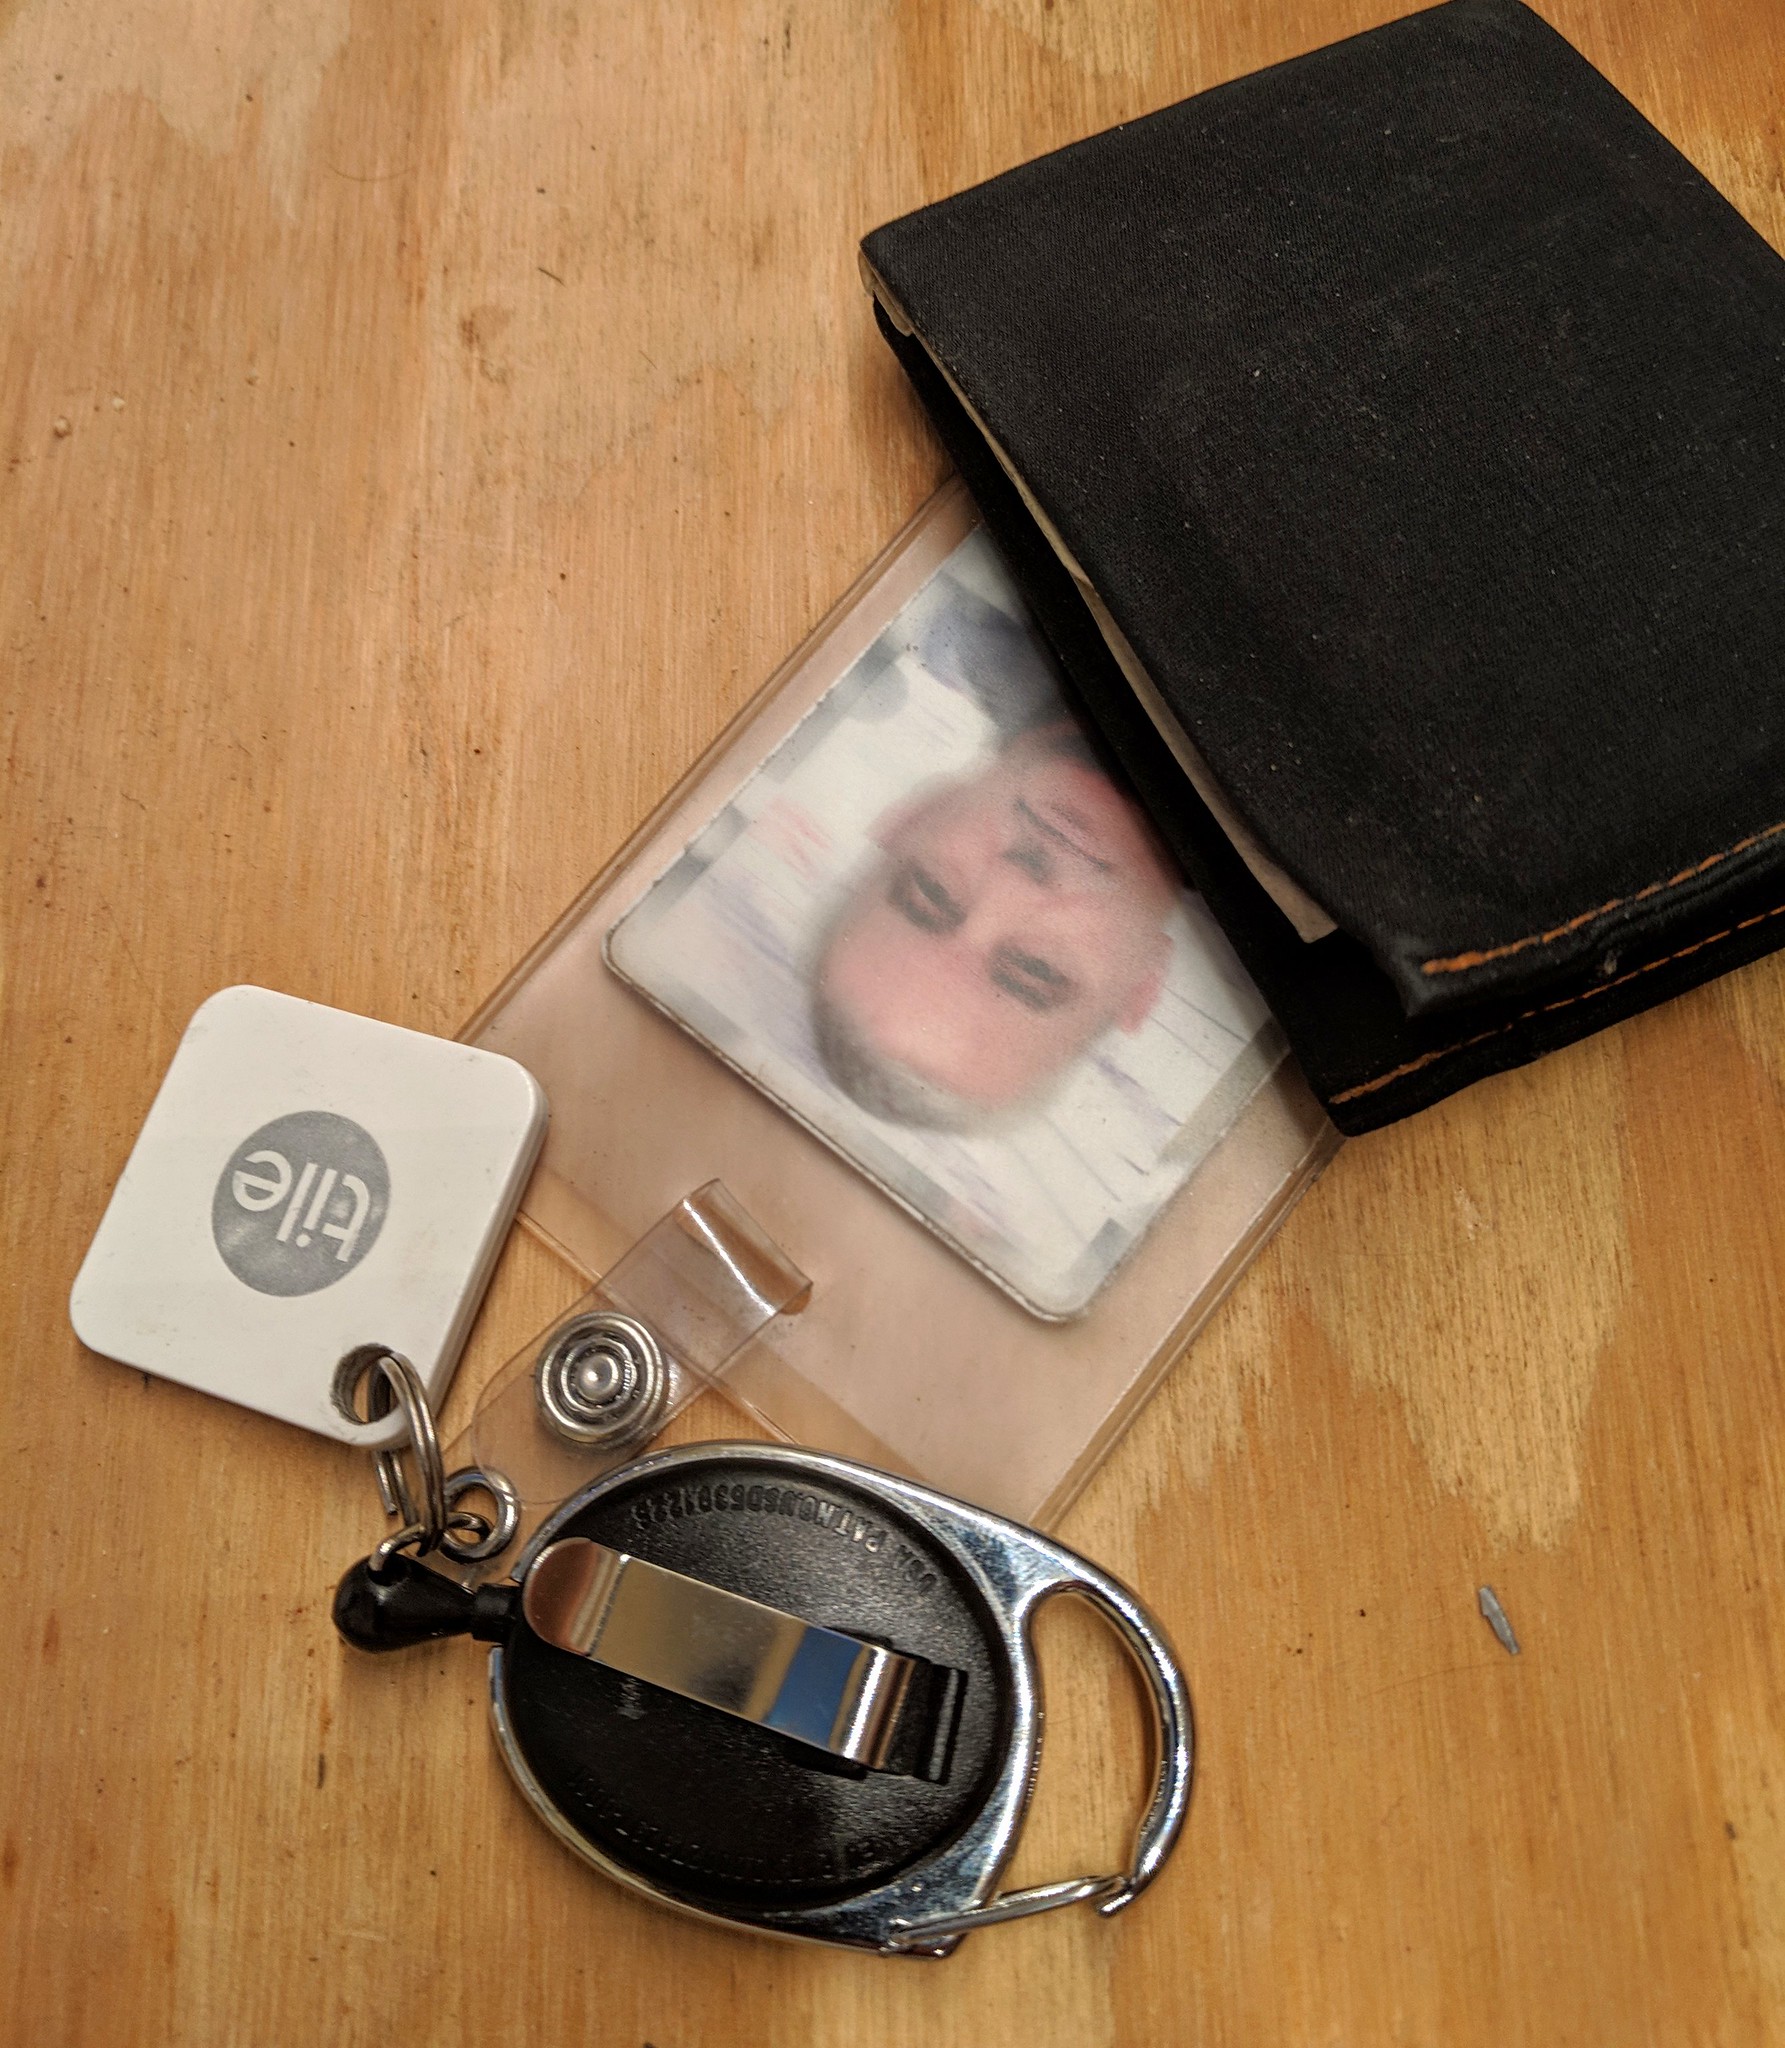 Keys & wallet with tiles